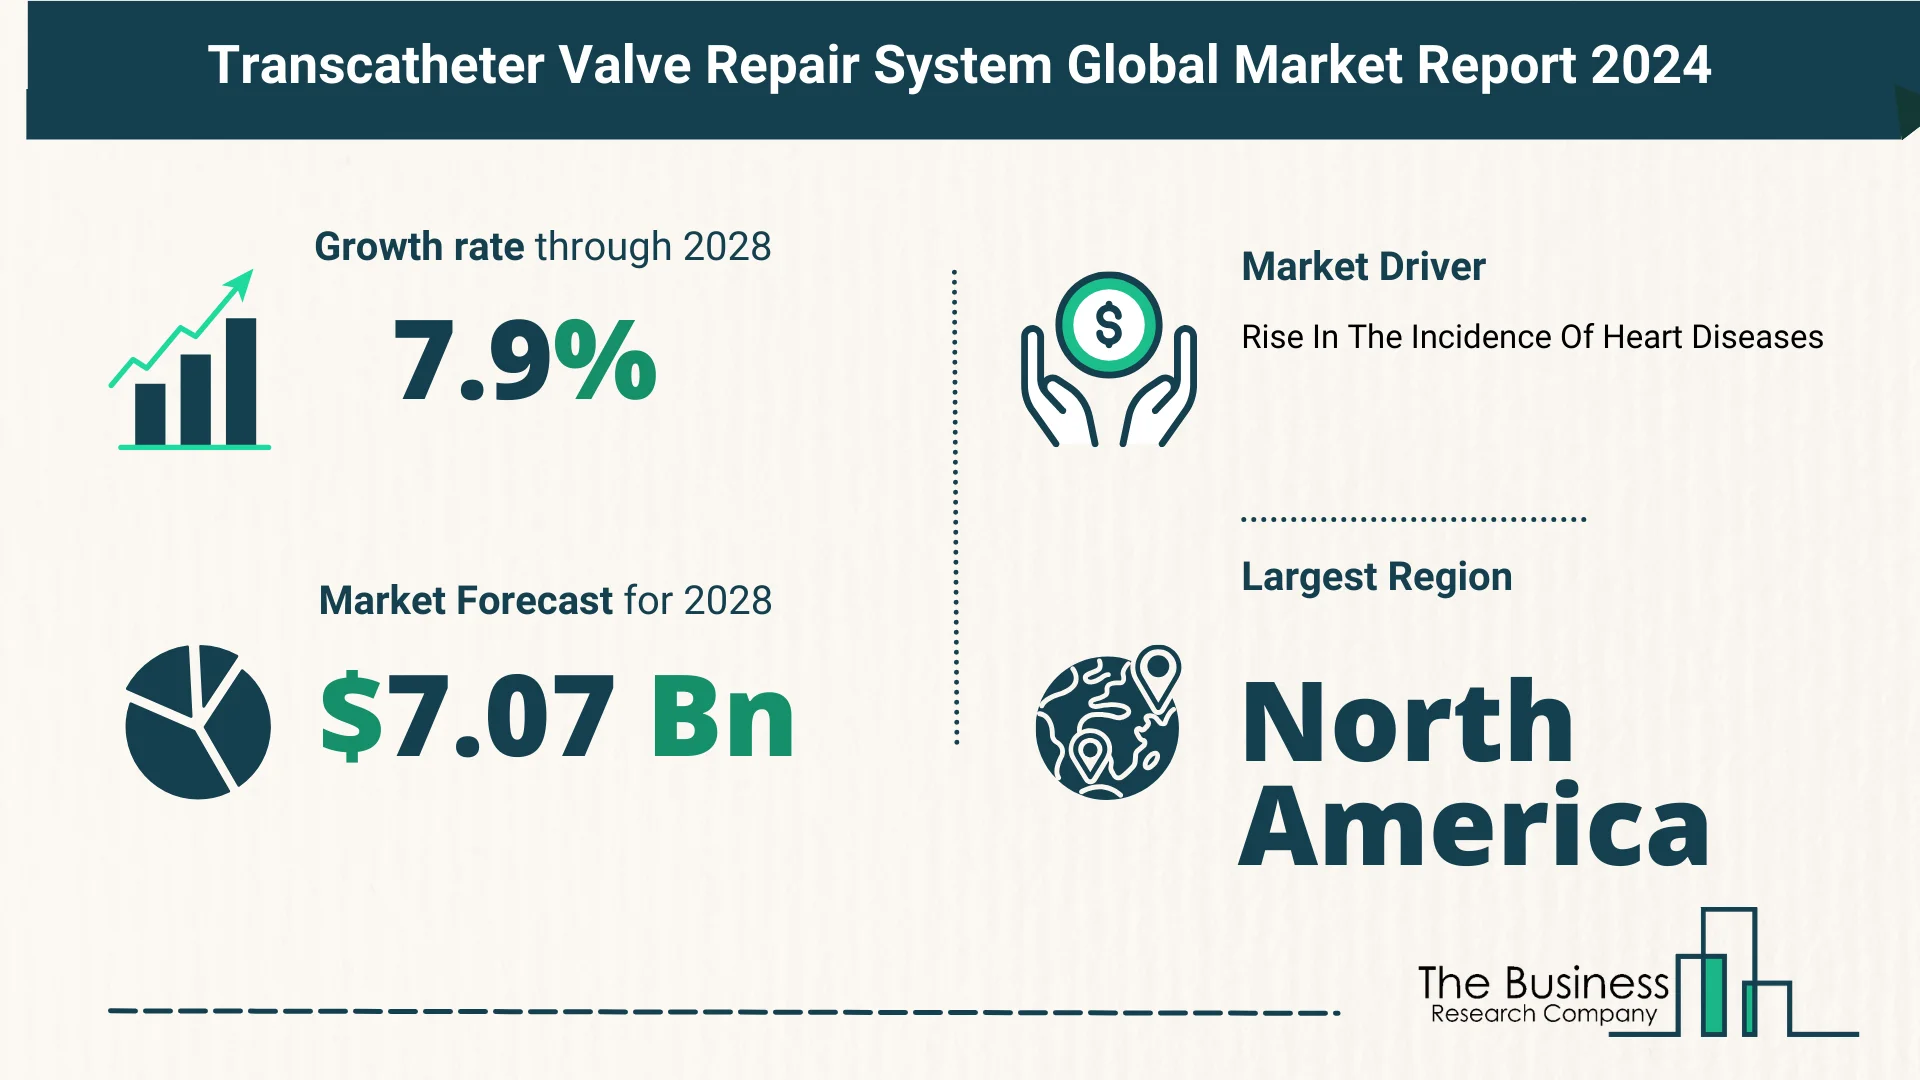 Transcatheter Valve Repair System Market Report 2024: Market Size, Drivers, And Trends